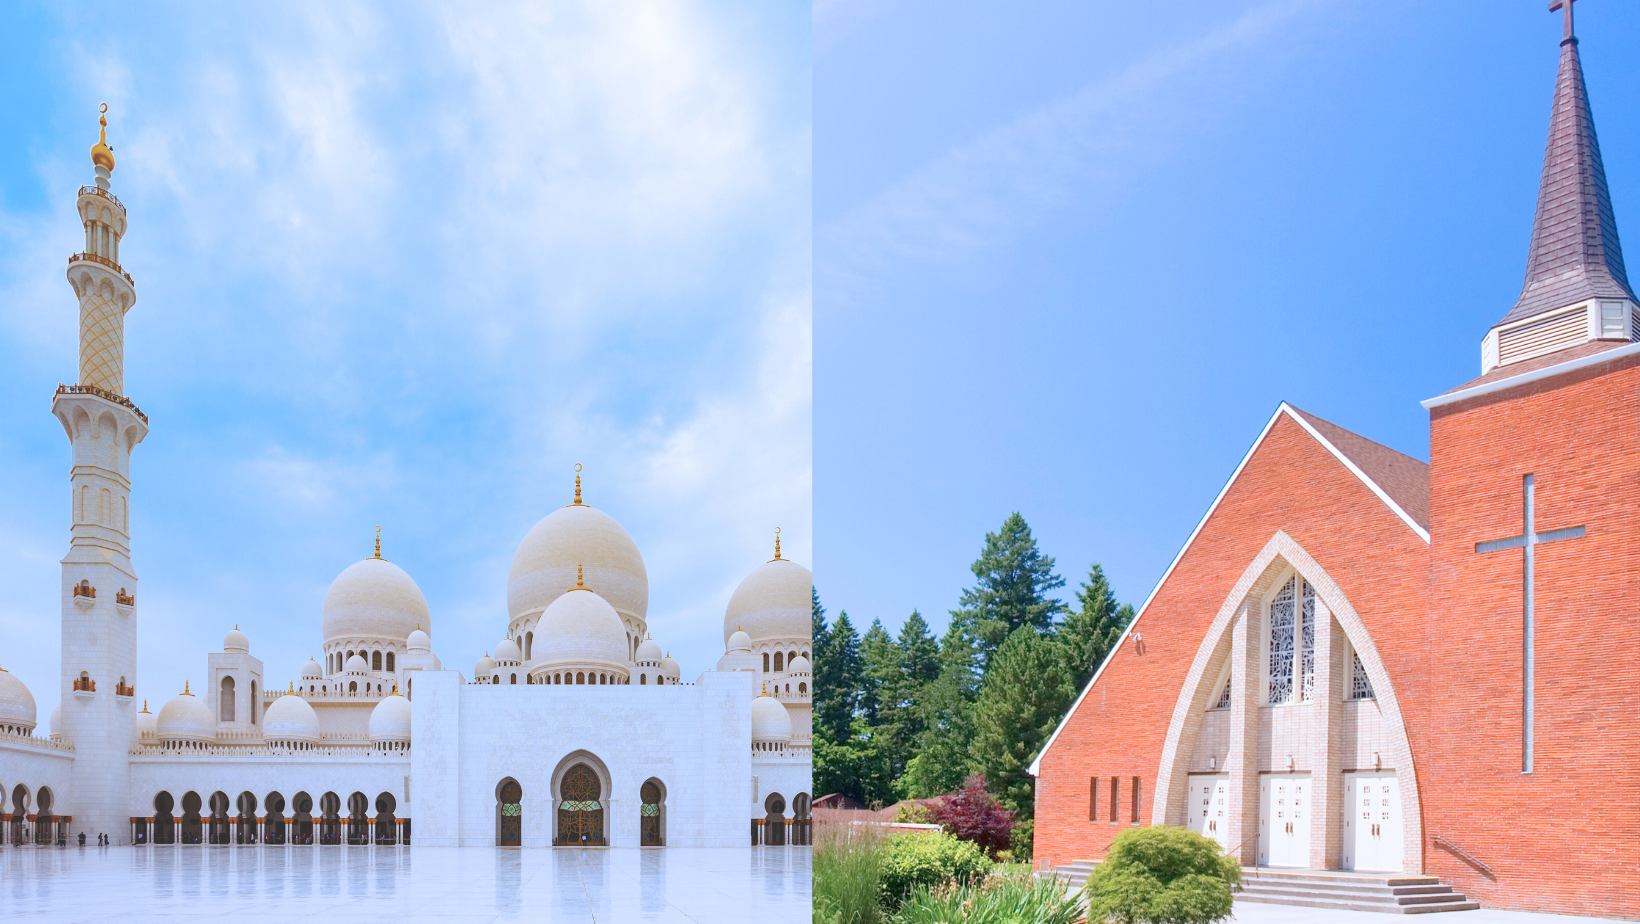 Blog title - Mosque and church